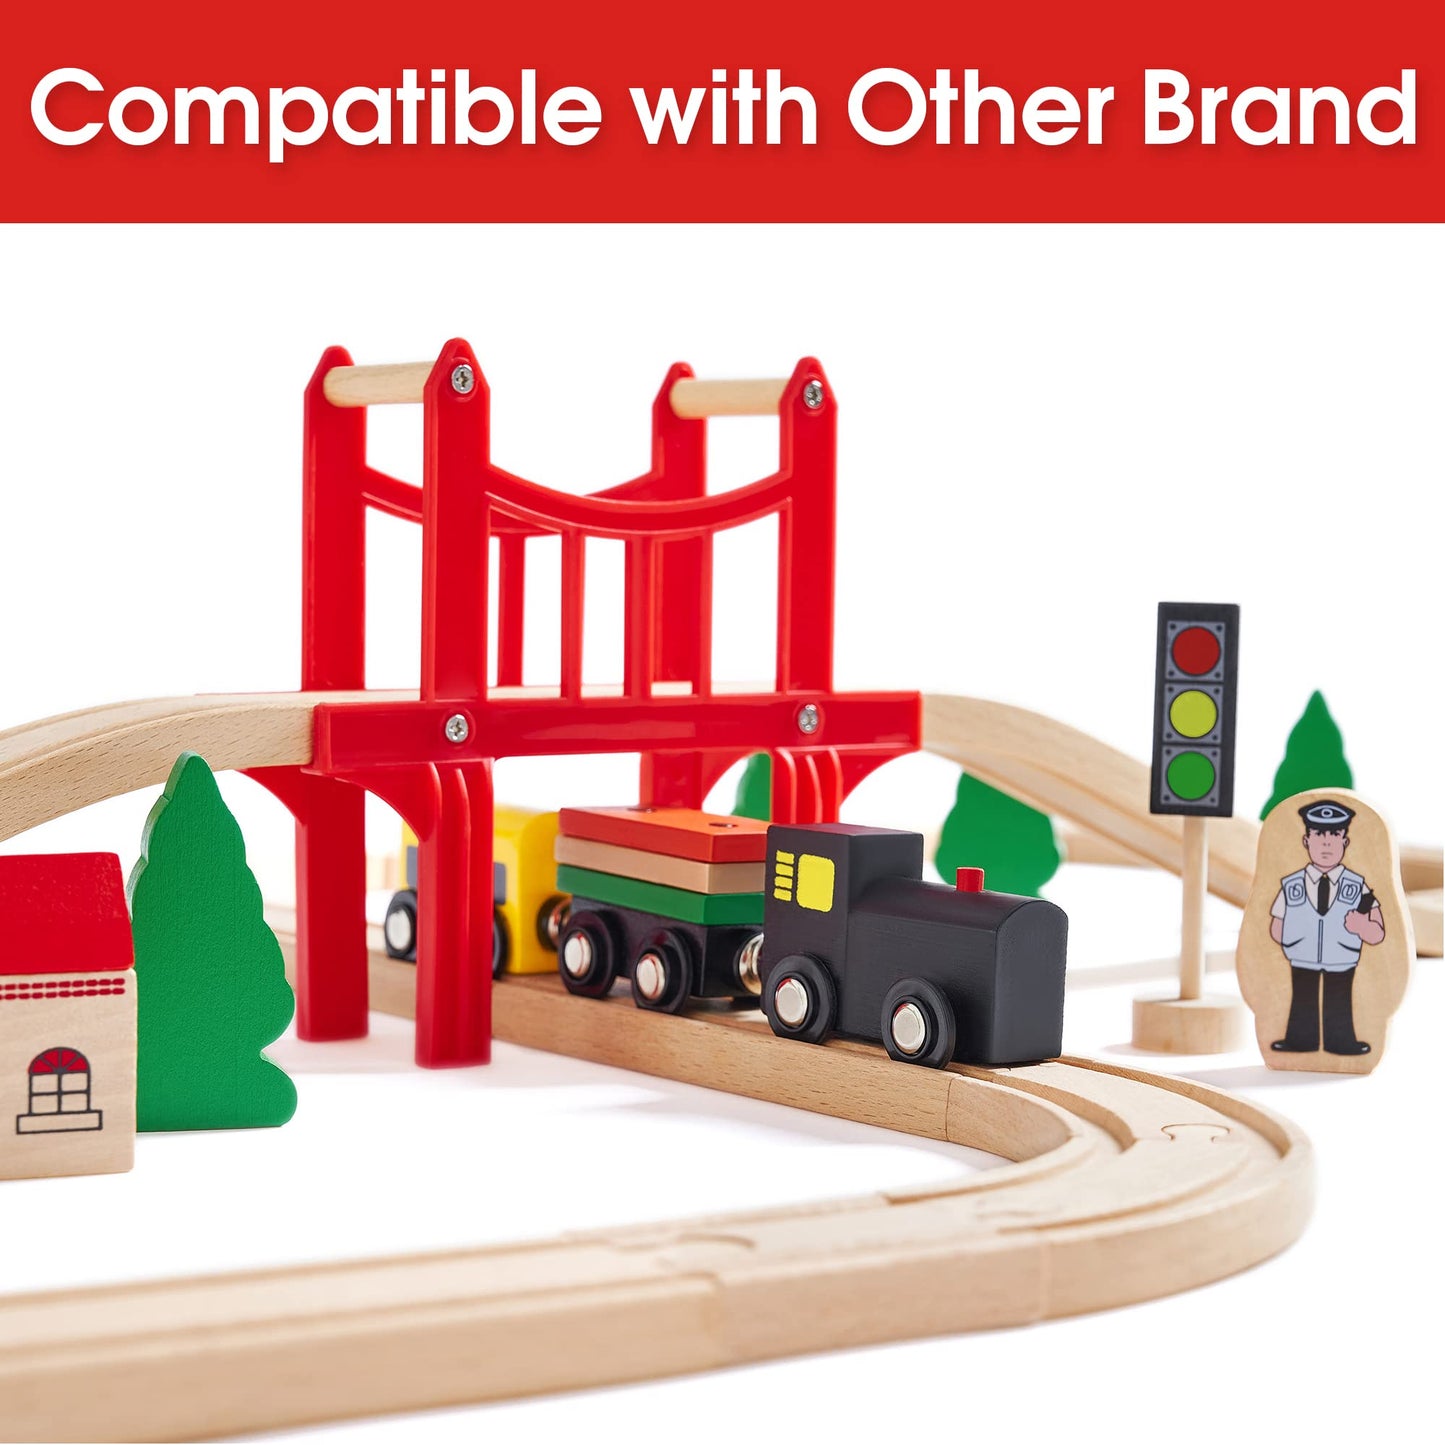 Tiny Land Wooden Train Set for Toddler - 39 Pcs- with Wooden Tracks fits Thomas, fits Brio, fits Chuggington, fits Melissa and Doug - Expandable,